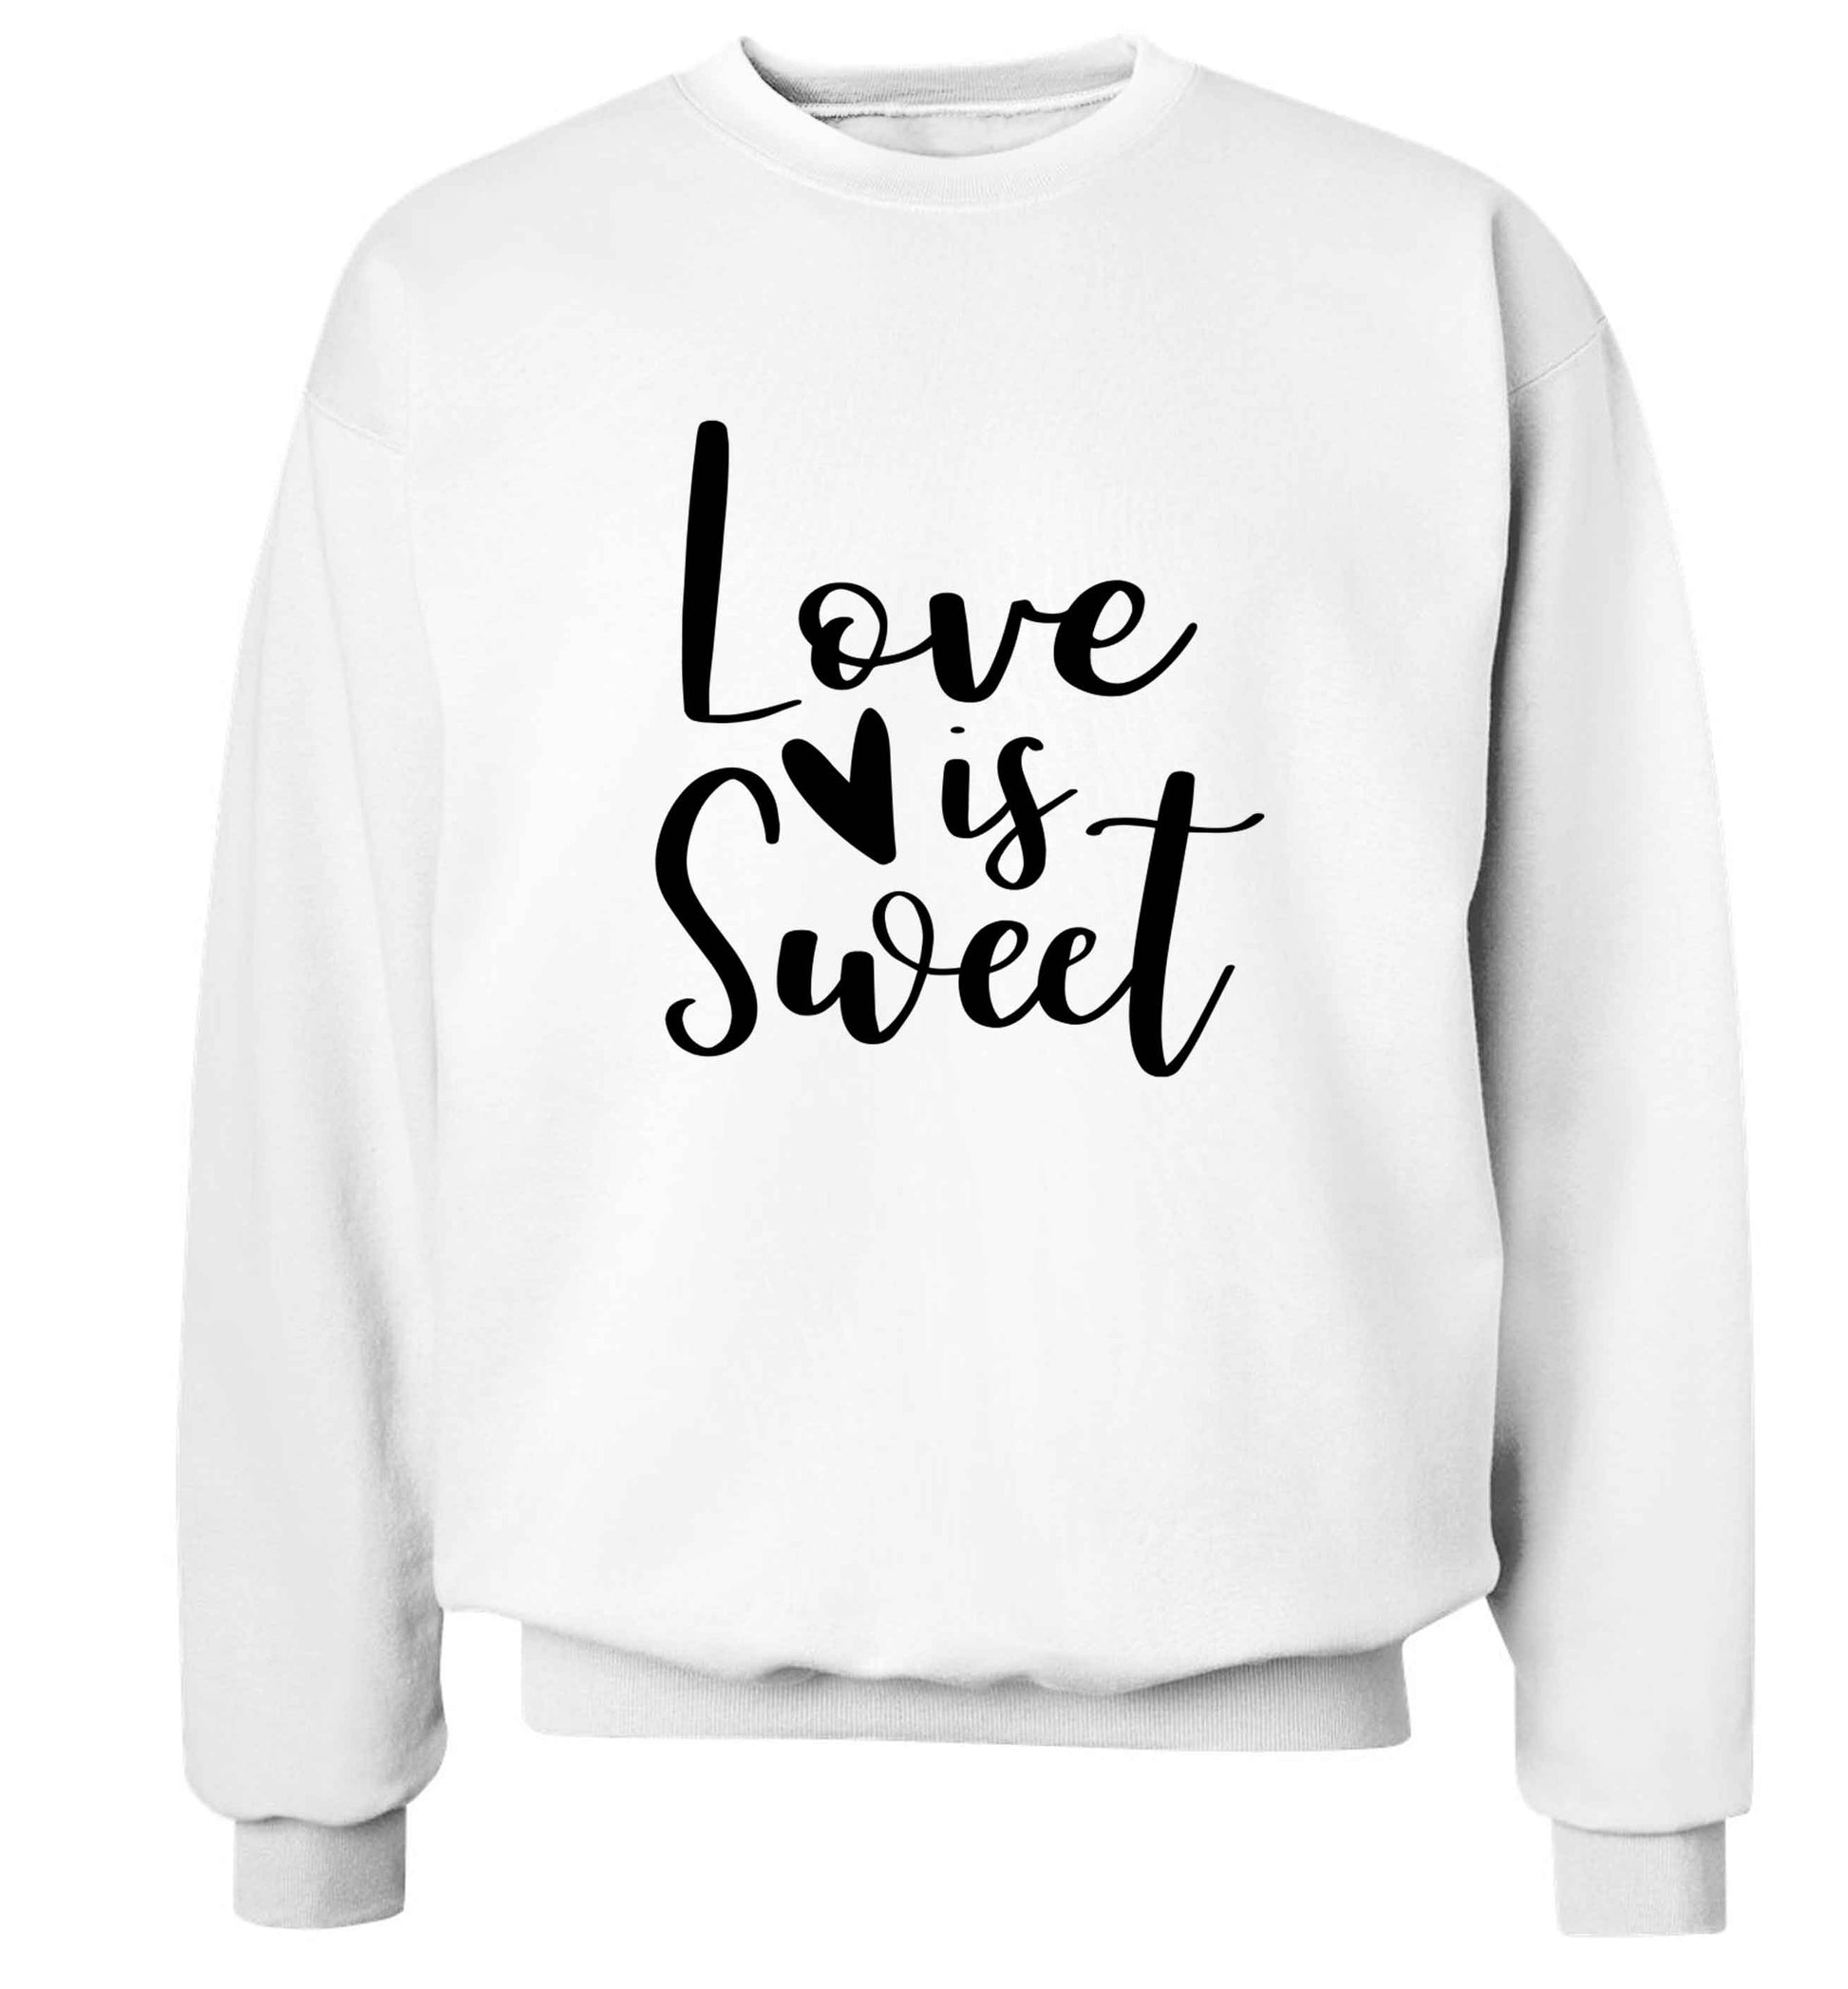 Love really does make the world go round! Ideal for weddings, valentines or just simply to show someone you love them!  adult's unisex white sweater 2XL